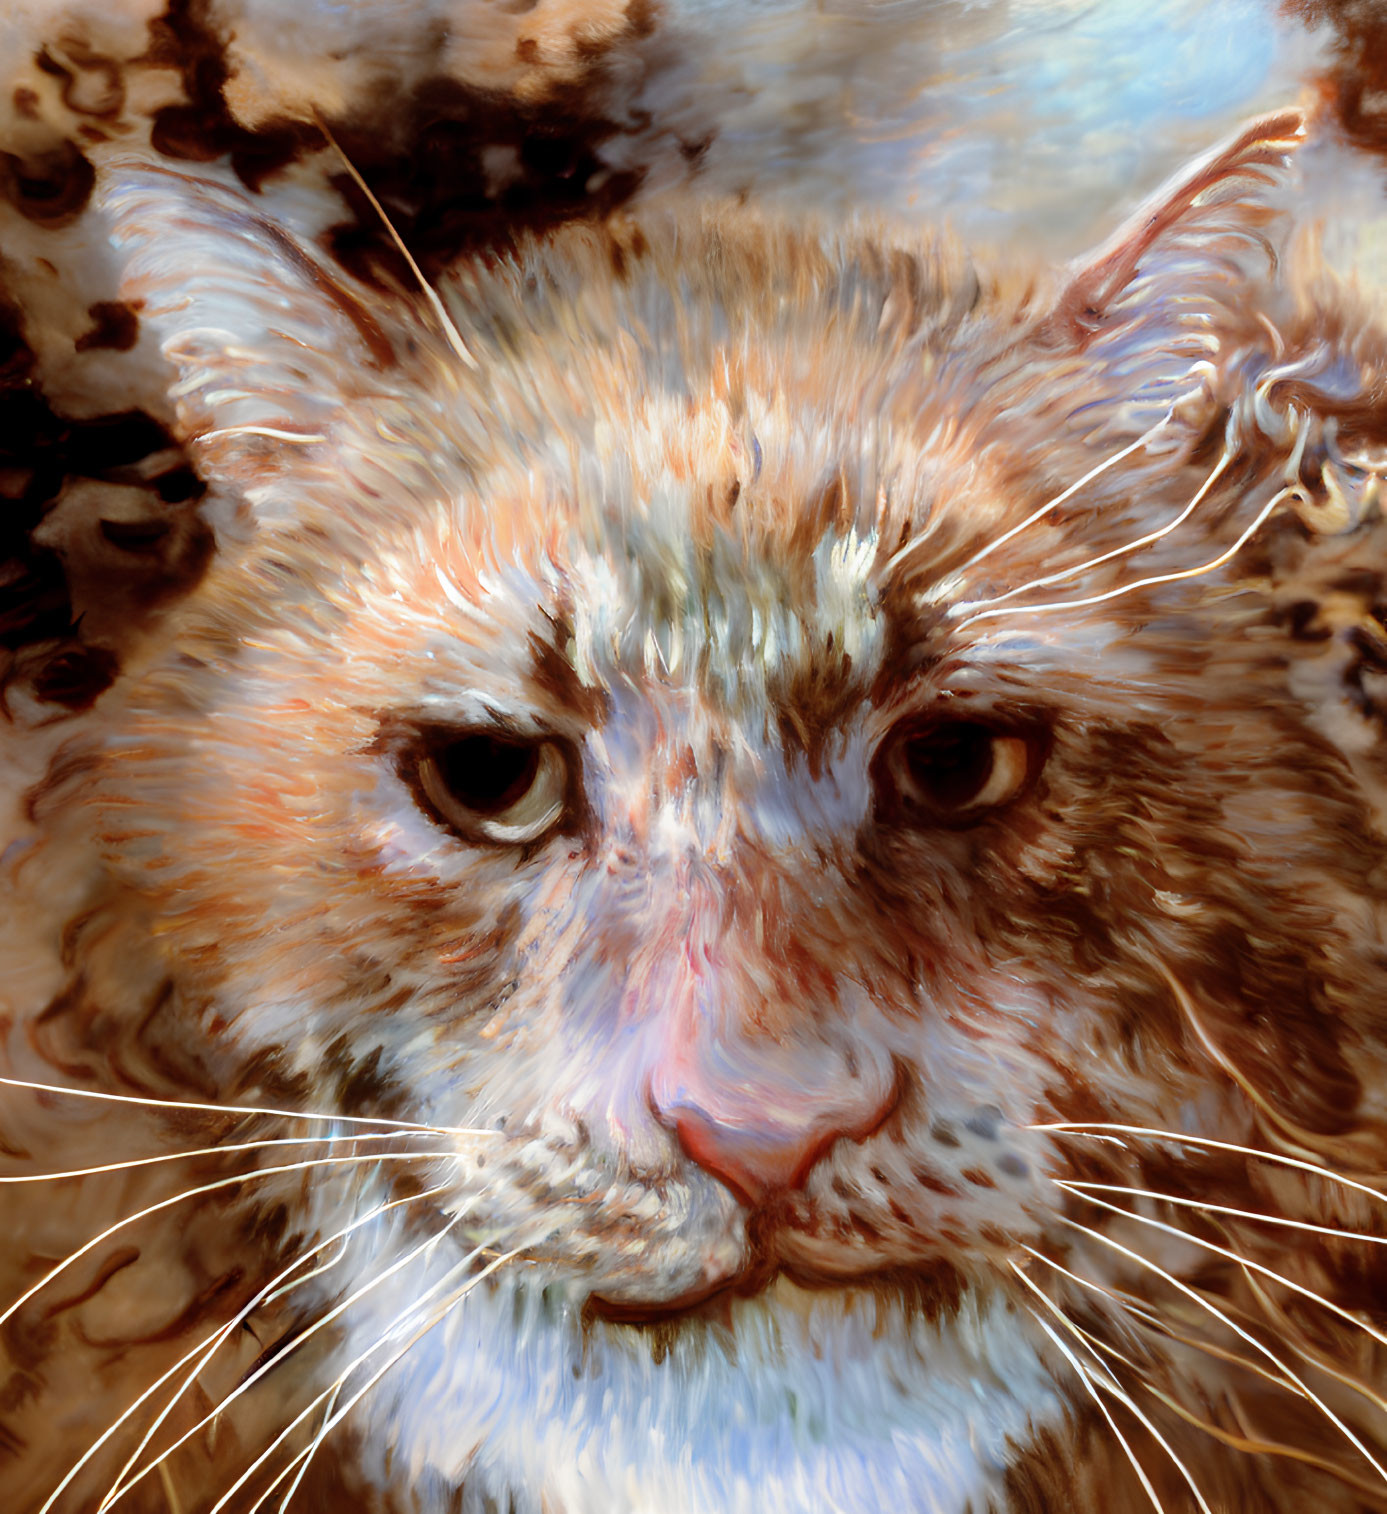 Detailed cat painting with warm earthy tones and intense gaze